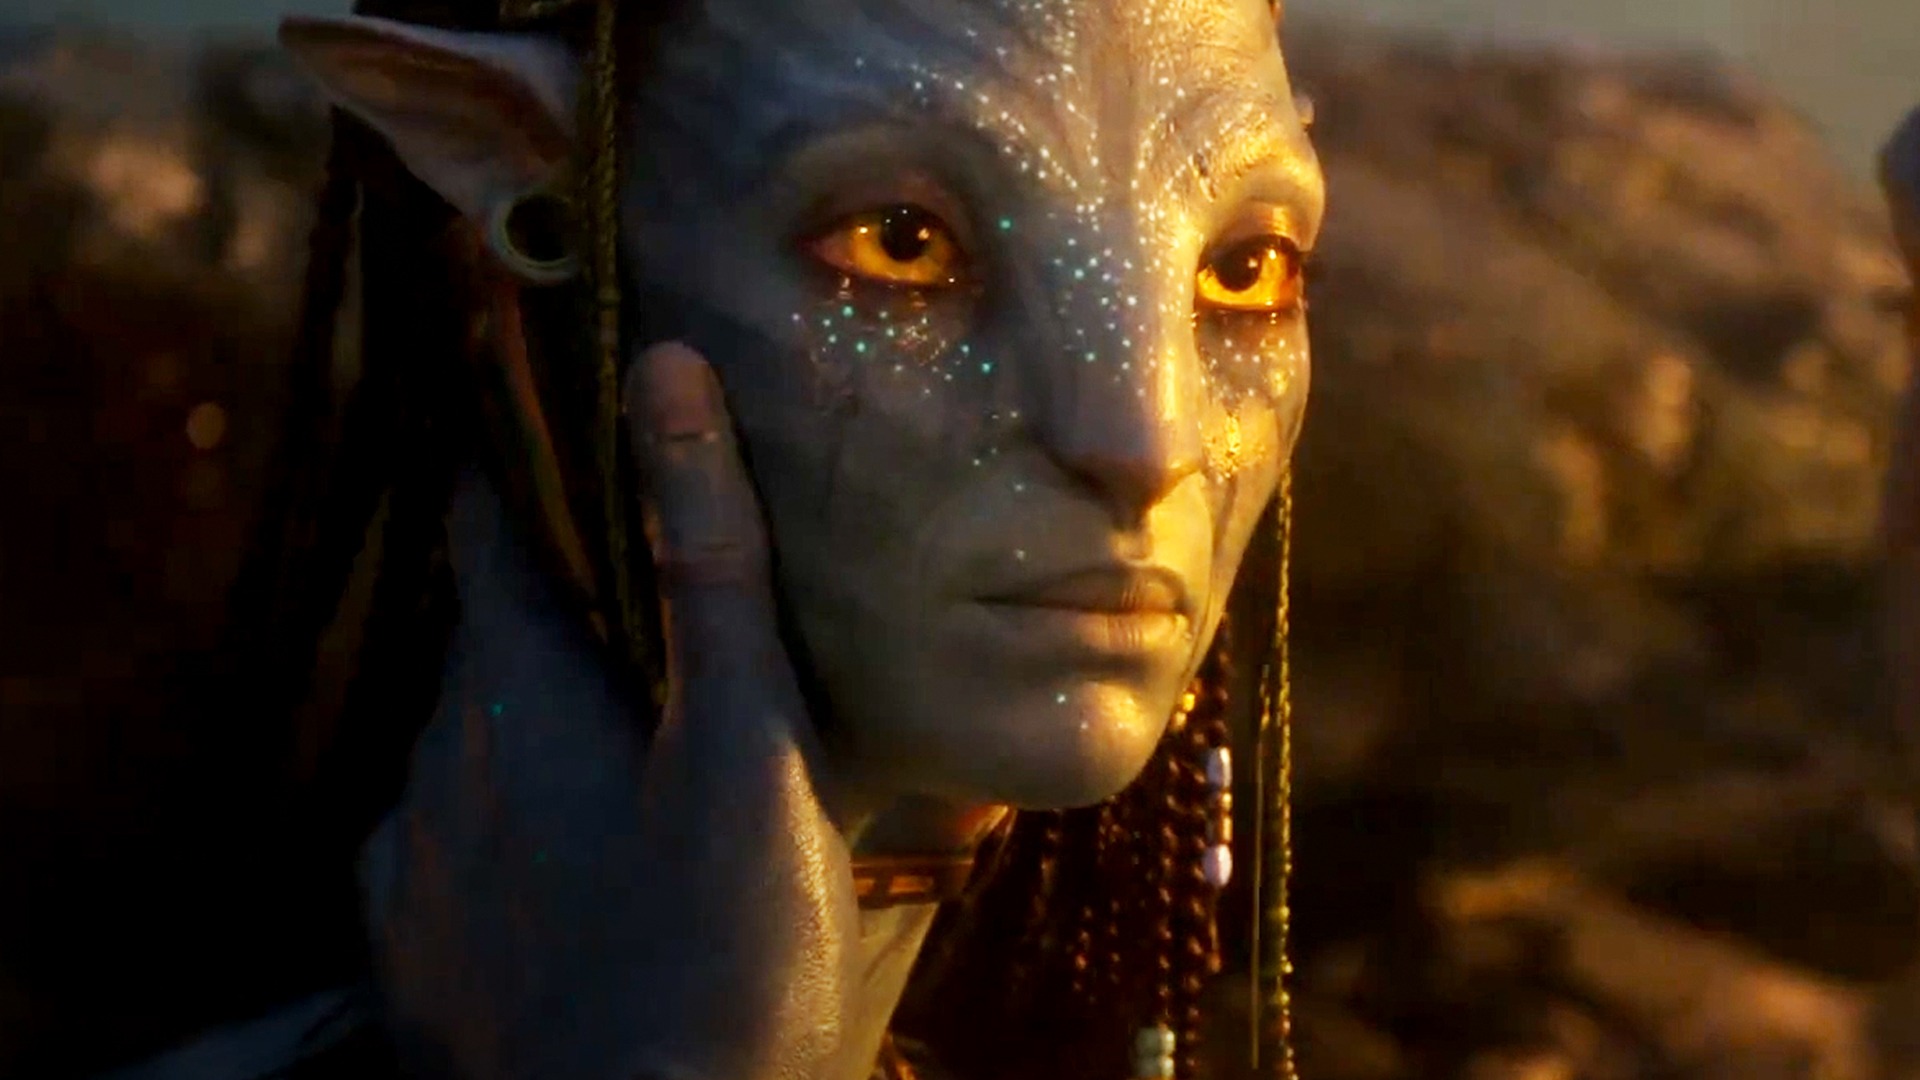 Avatar The Way of Water Trailer 1 Trailers & Videos Rotten Tomatoes